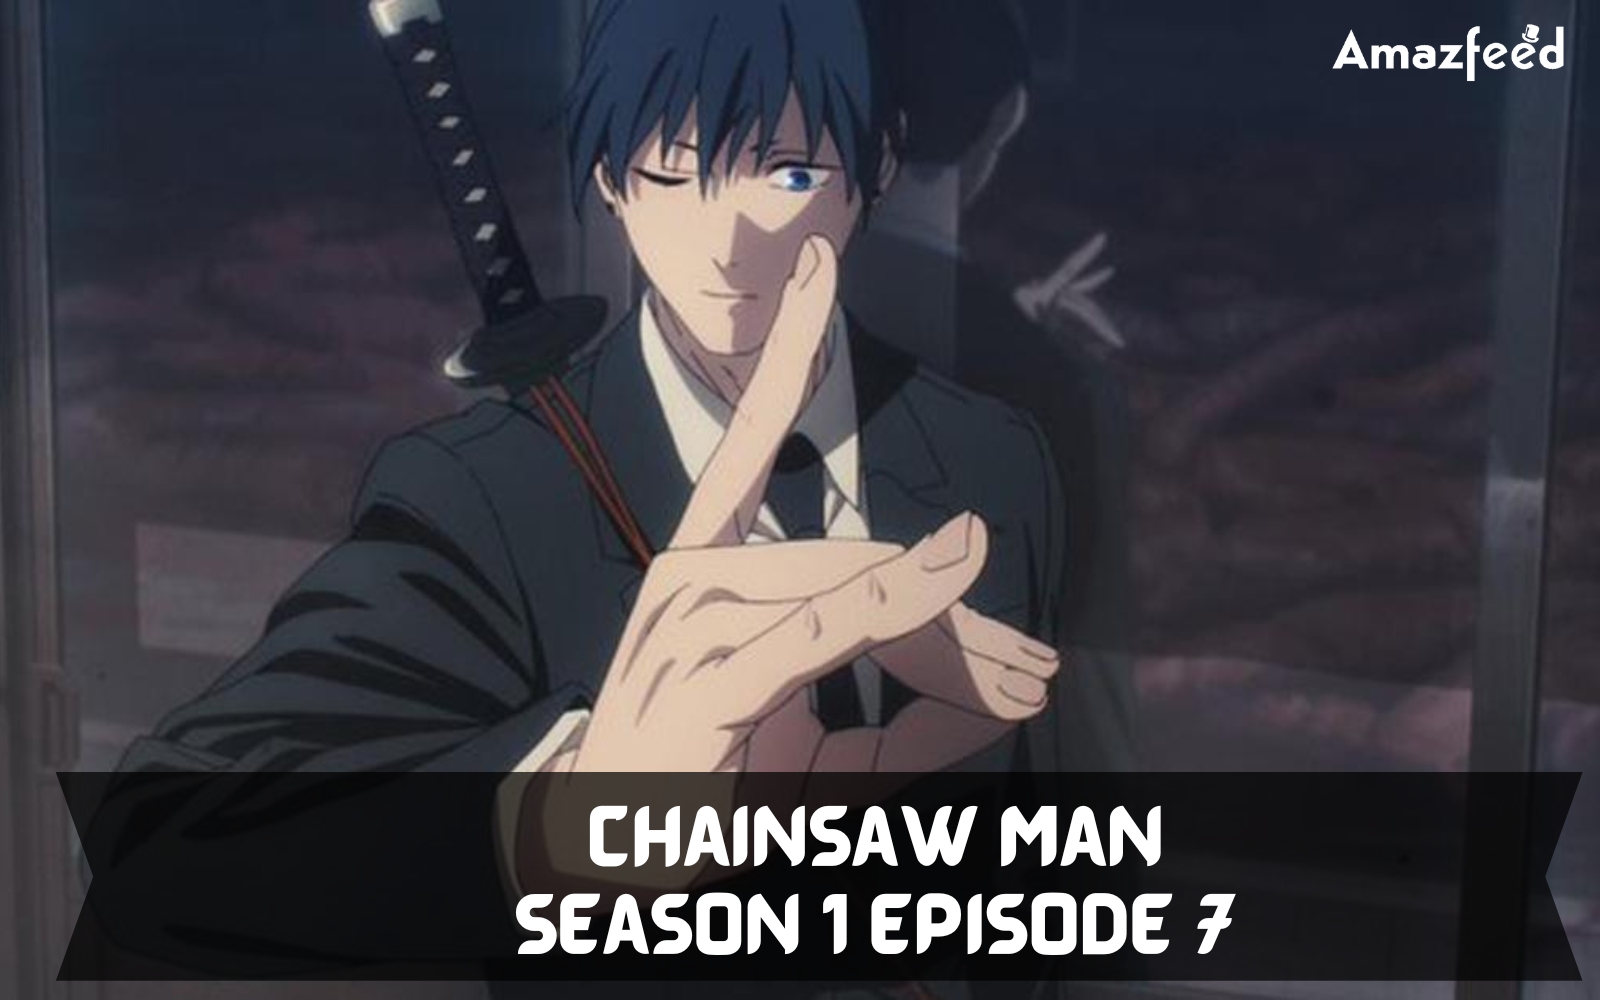 Chainsaw Man Episode 7 Is When The Prologue Ends And The Real Show Begins